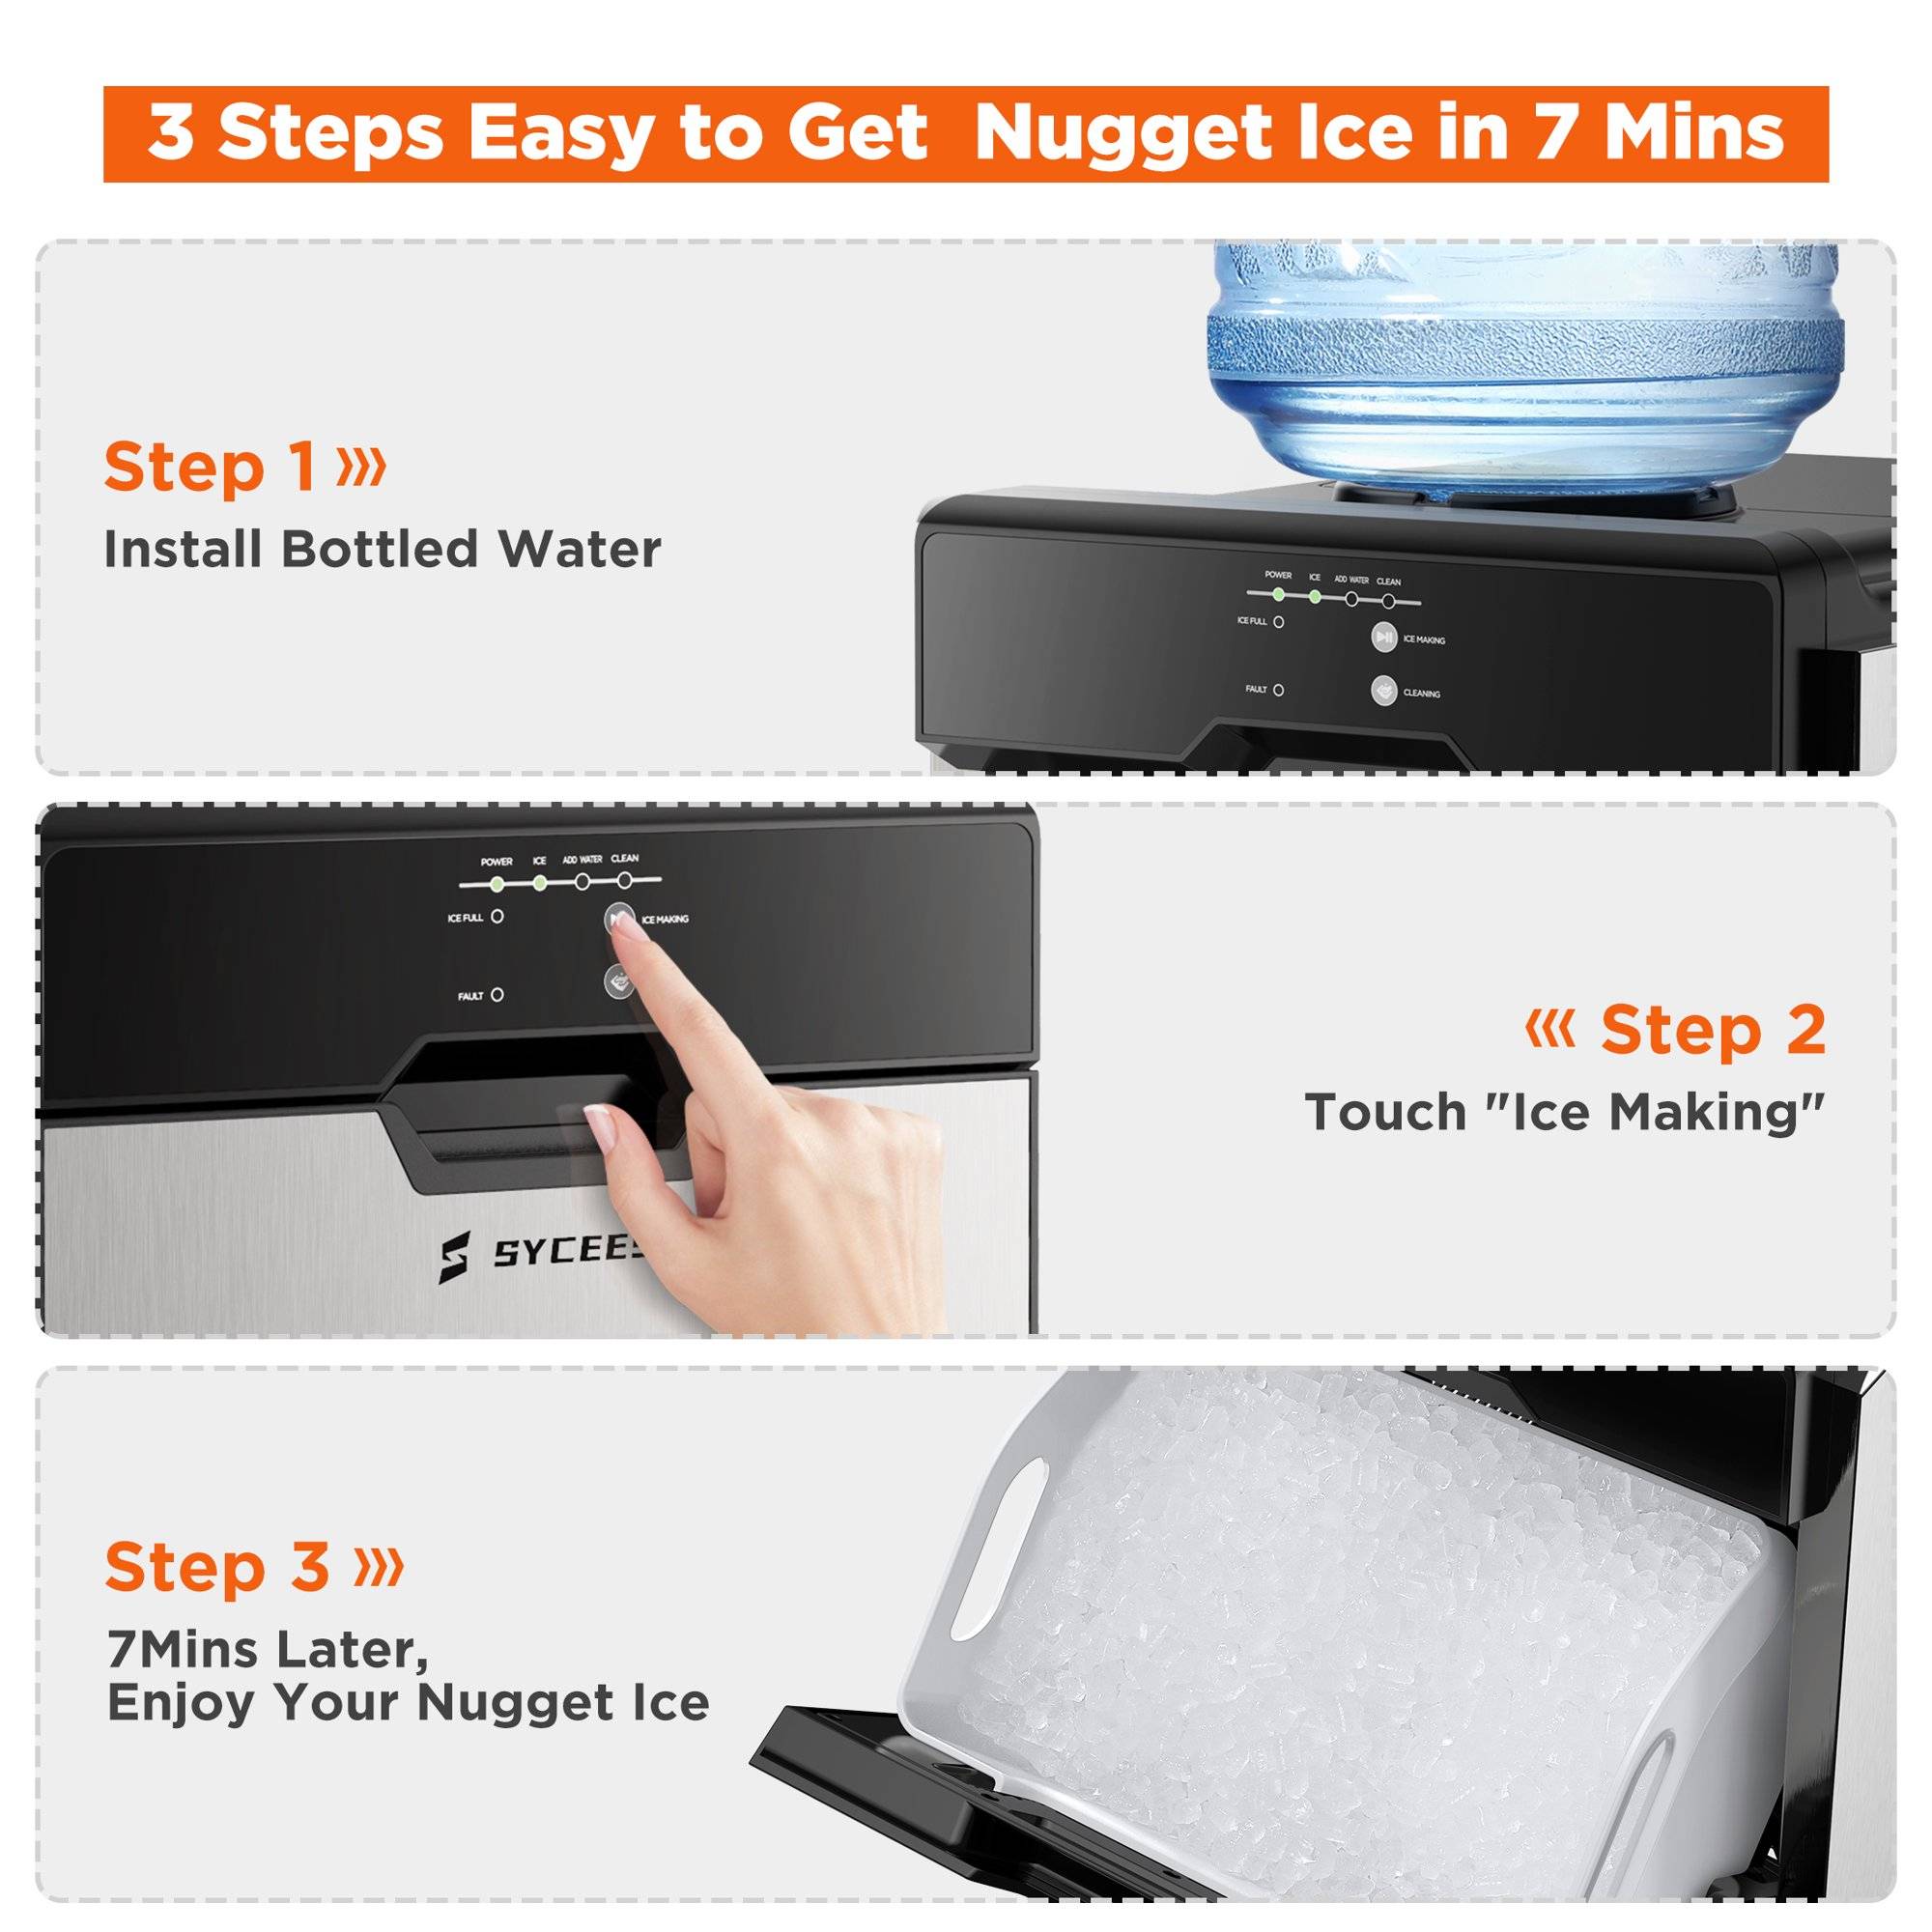  SYCEES Nugget Ice Maker for Countertop, 33lbs/24h, Sonic Ice  Ready in 10 Mins, 5lbs Ice Storage, Self-Cleaning Function, Touch Control,  Stainless Steel Pellet Ice Machine for Home Kitchen, Bar, Office 